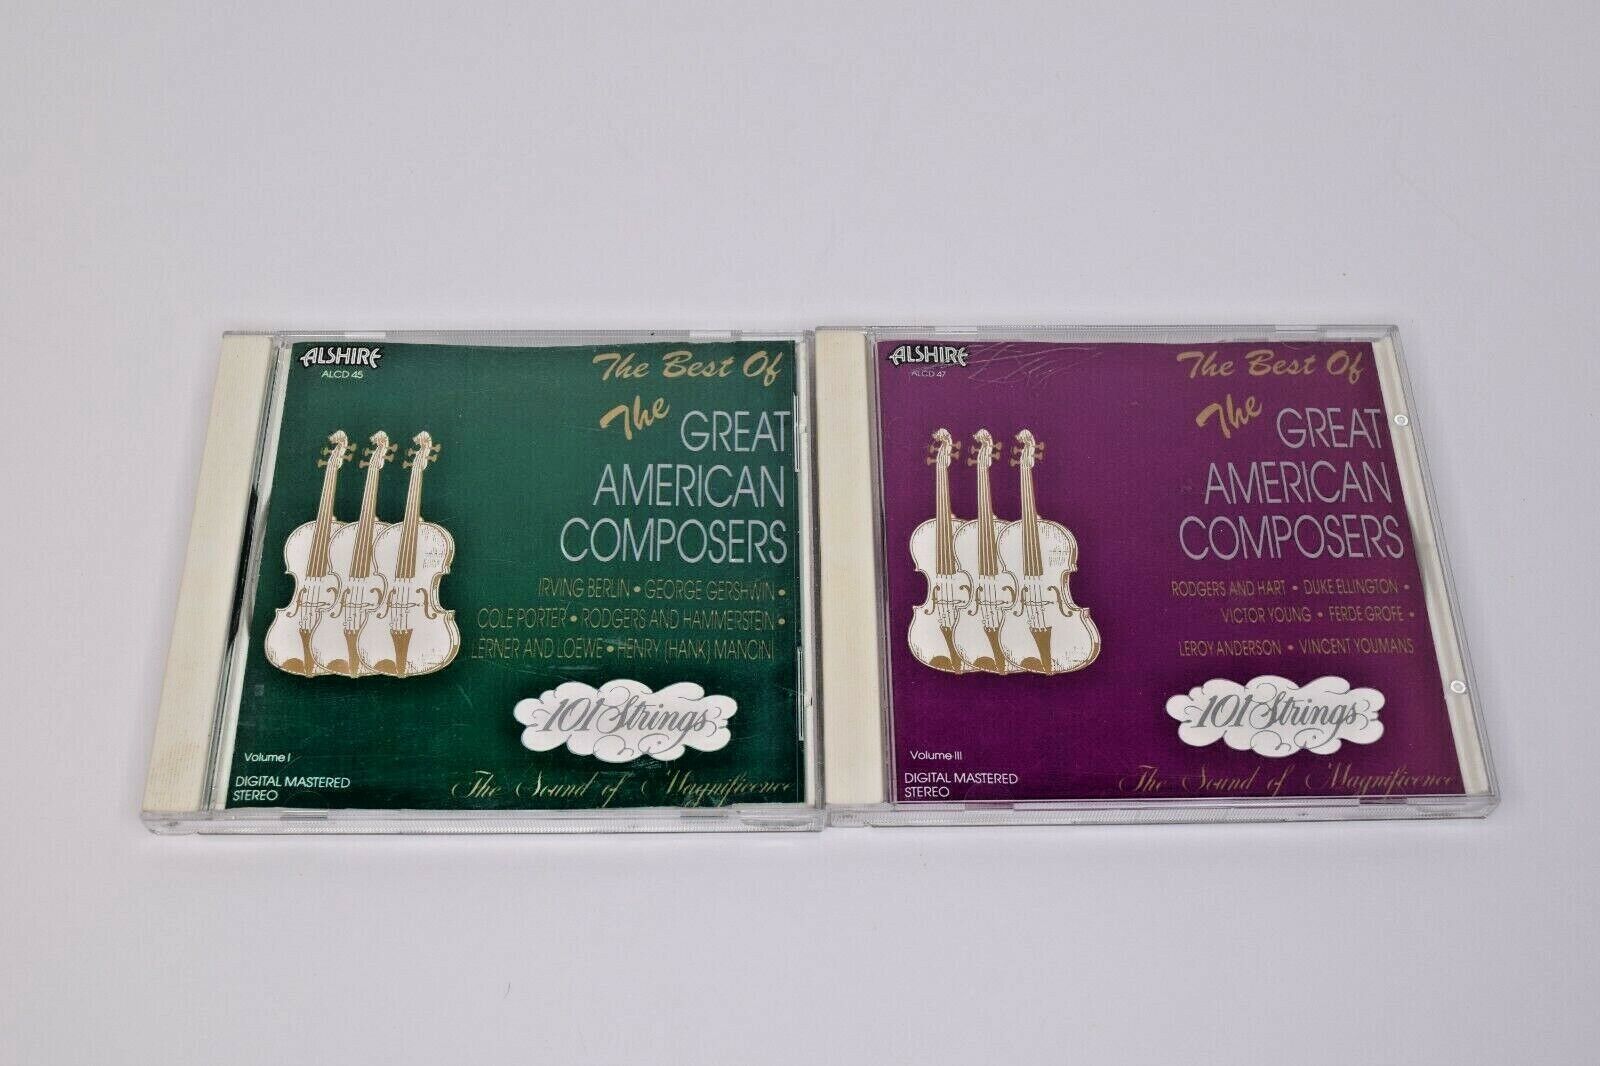 Primary image for Lot of 2 Best of the Great American Composers CDs by 101 Strings Vol. 1 & 3